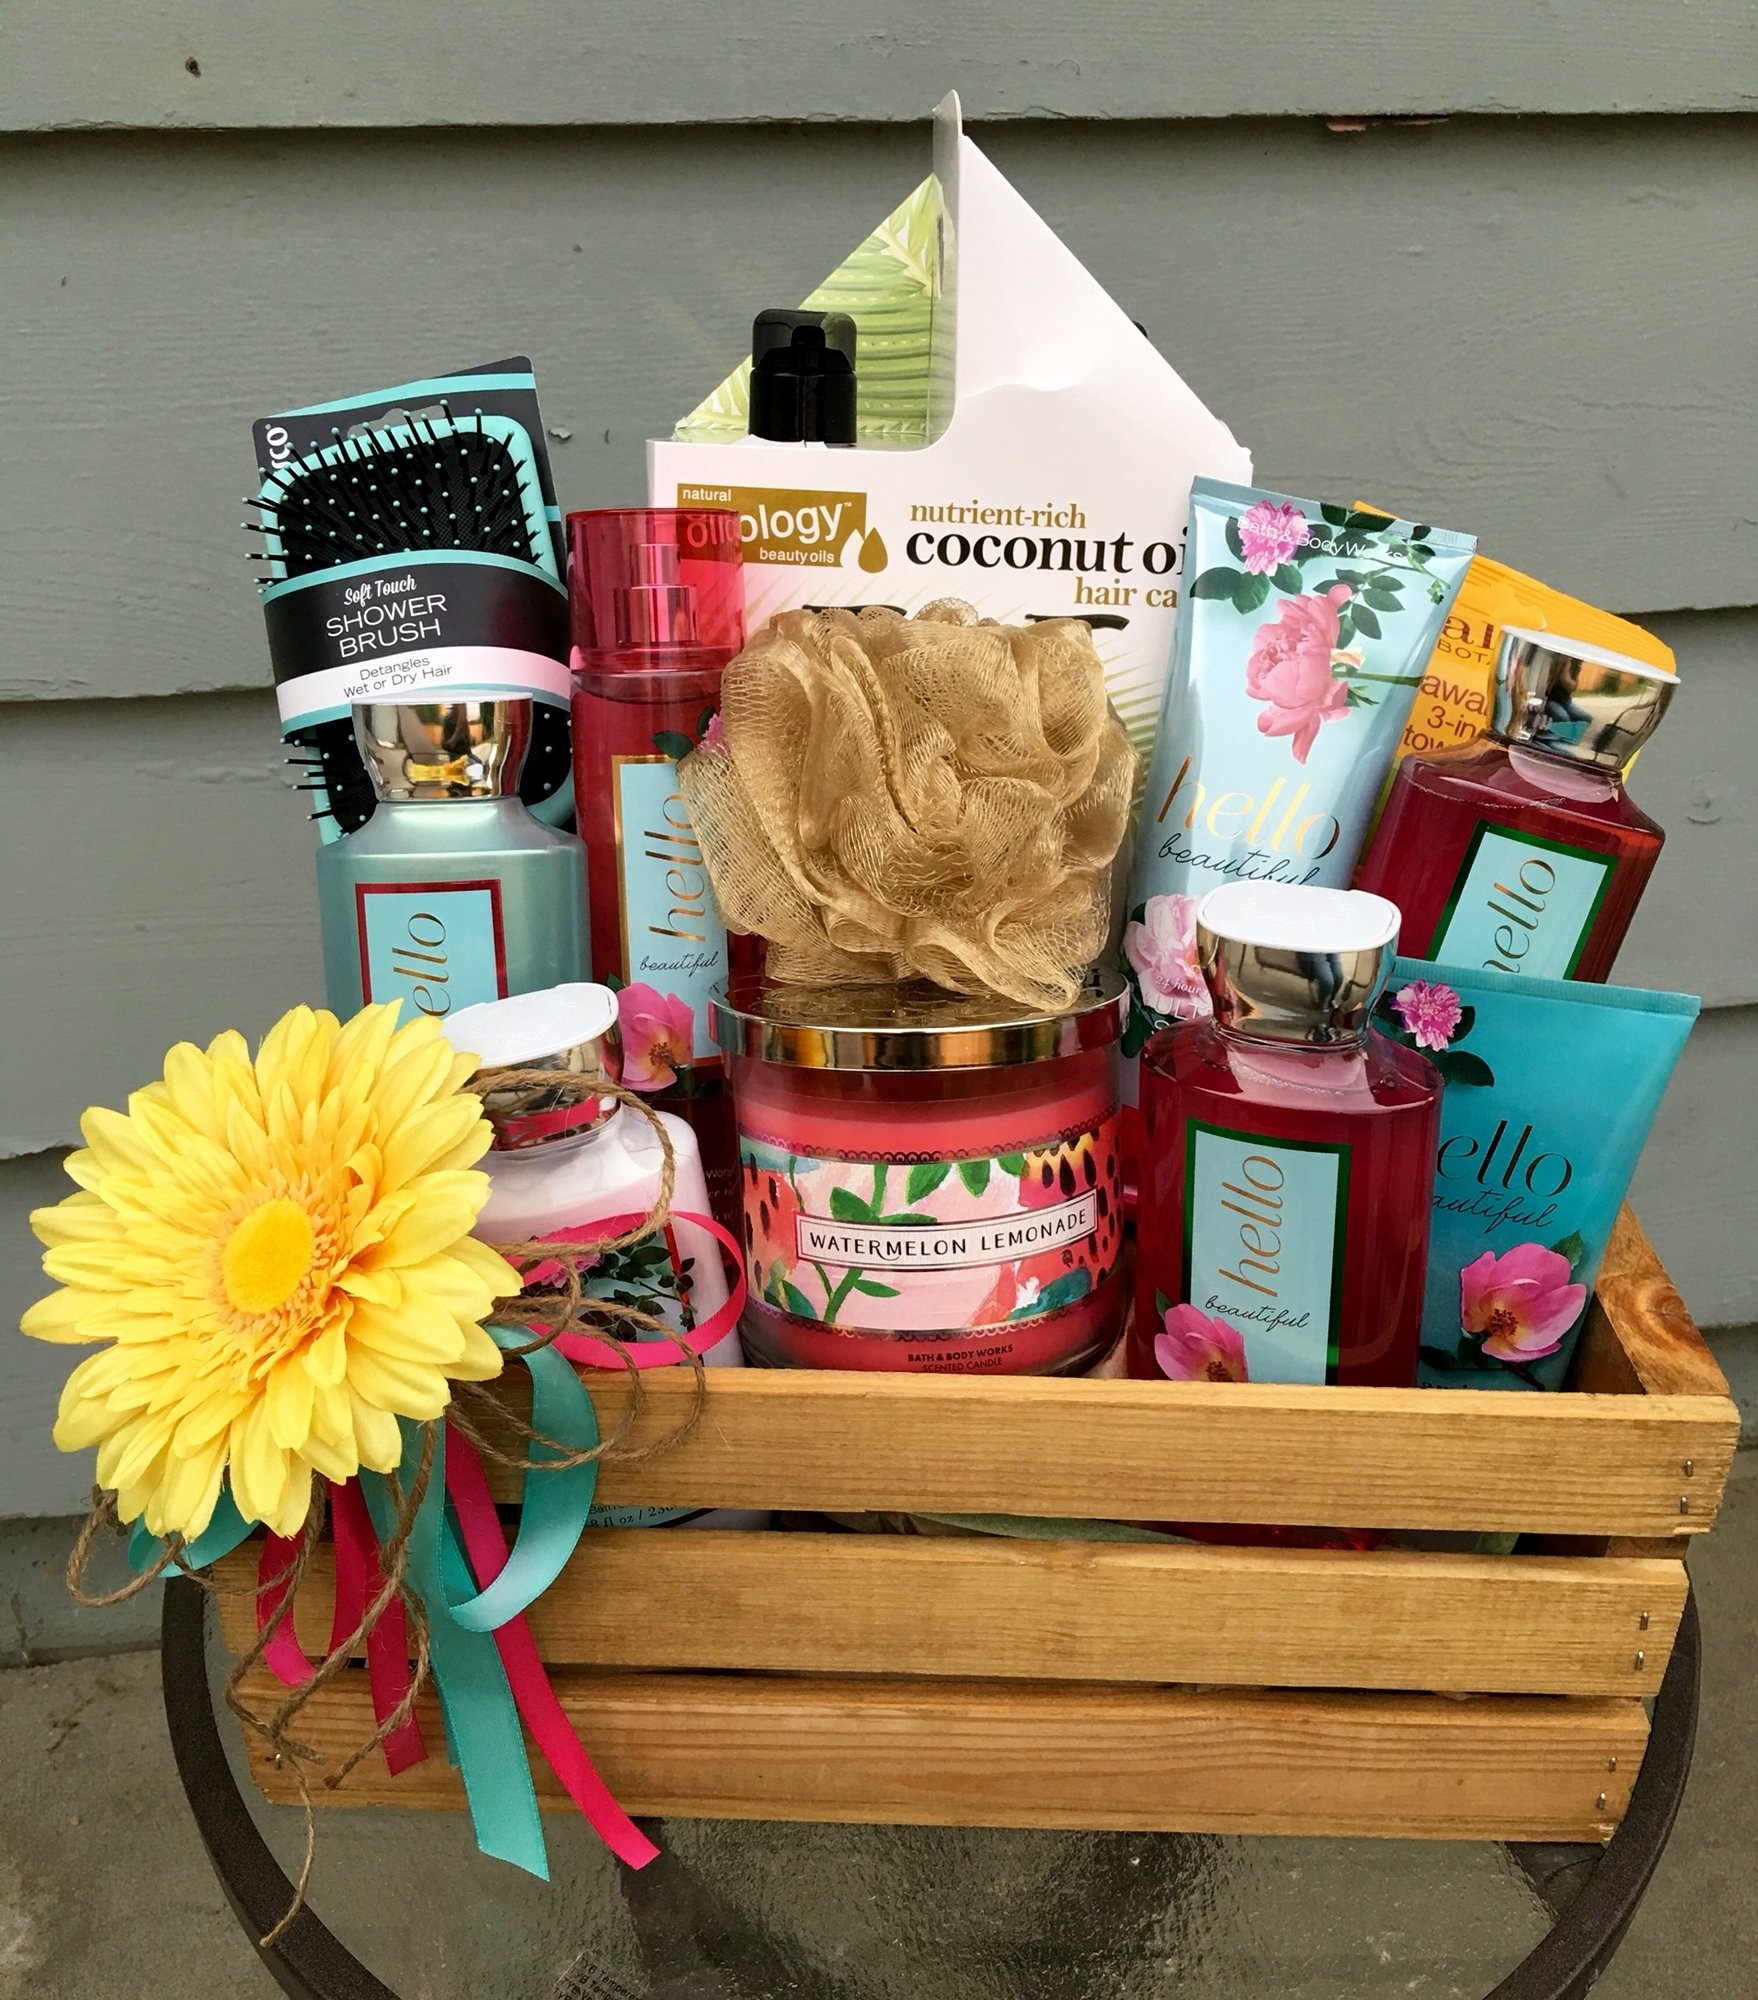 10 Great Gift Basket Ideas For Raffle fascinating baby shower door prize ideas coed basket games gift 2022